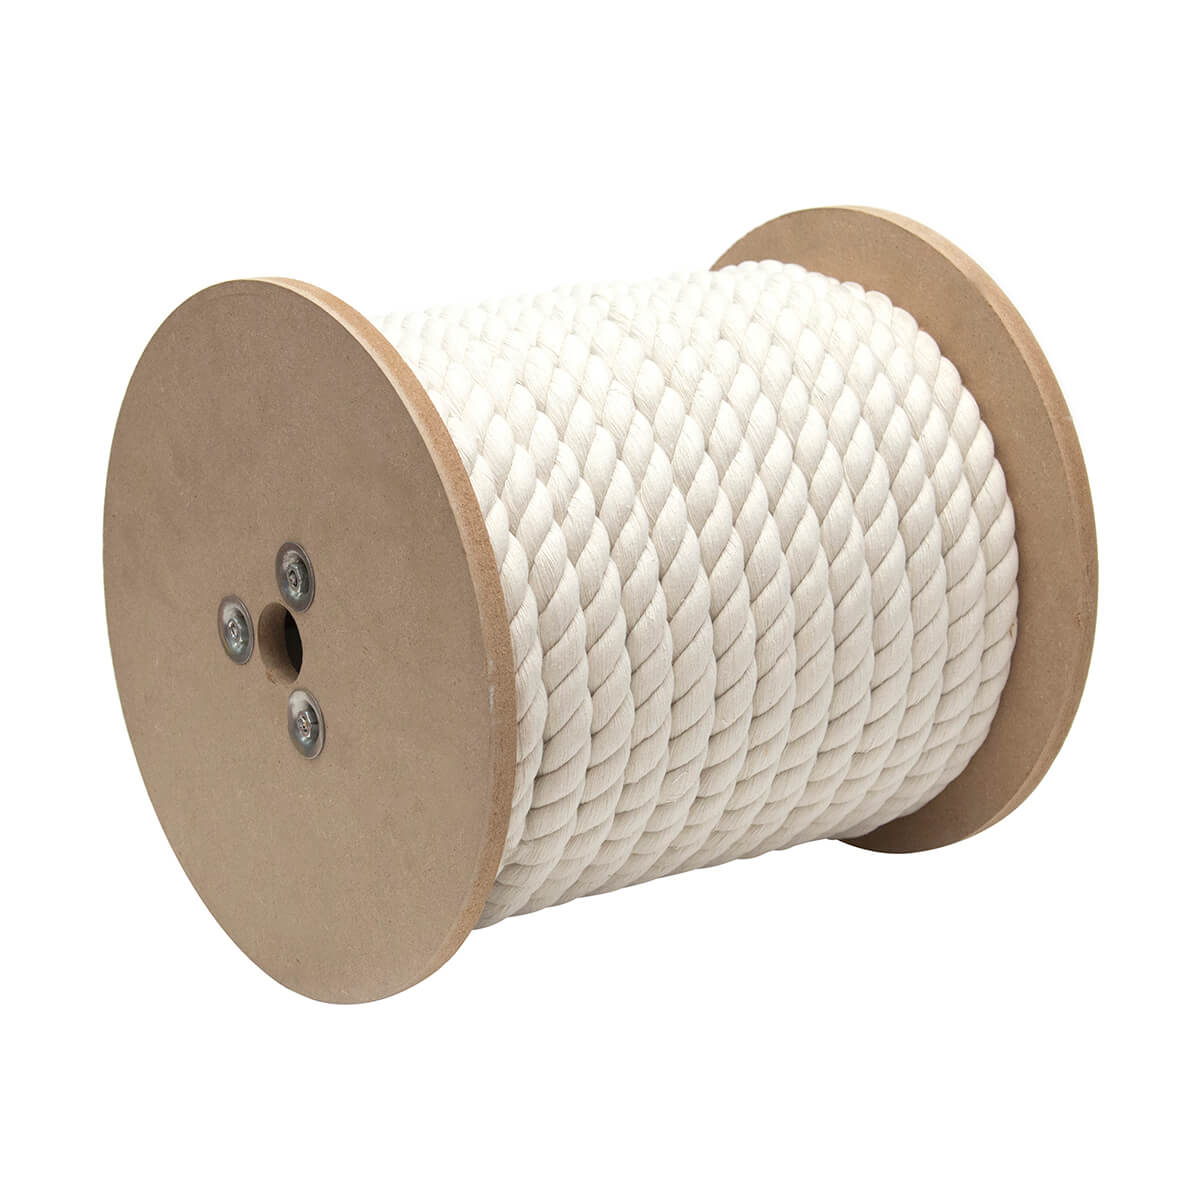 Twisted Cotton Rope - 1/2-in - Price / ft